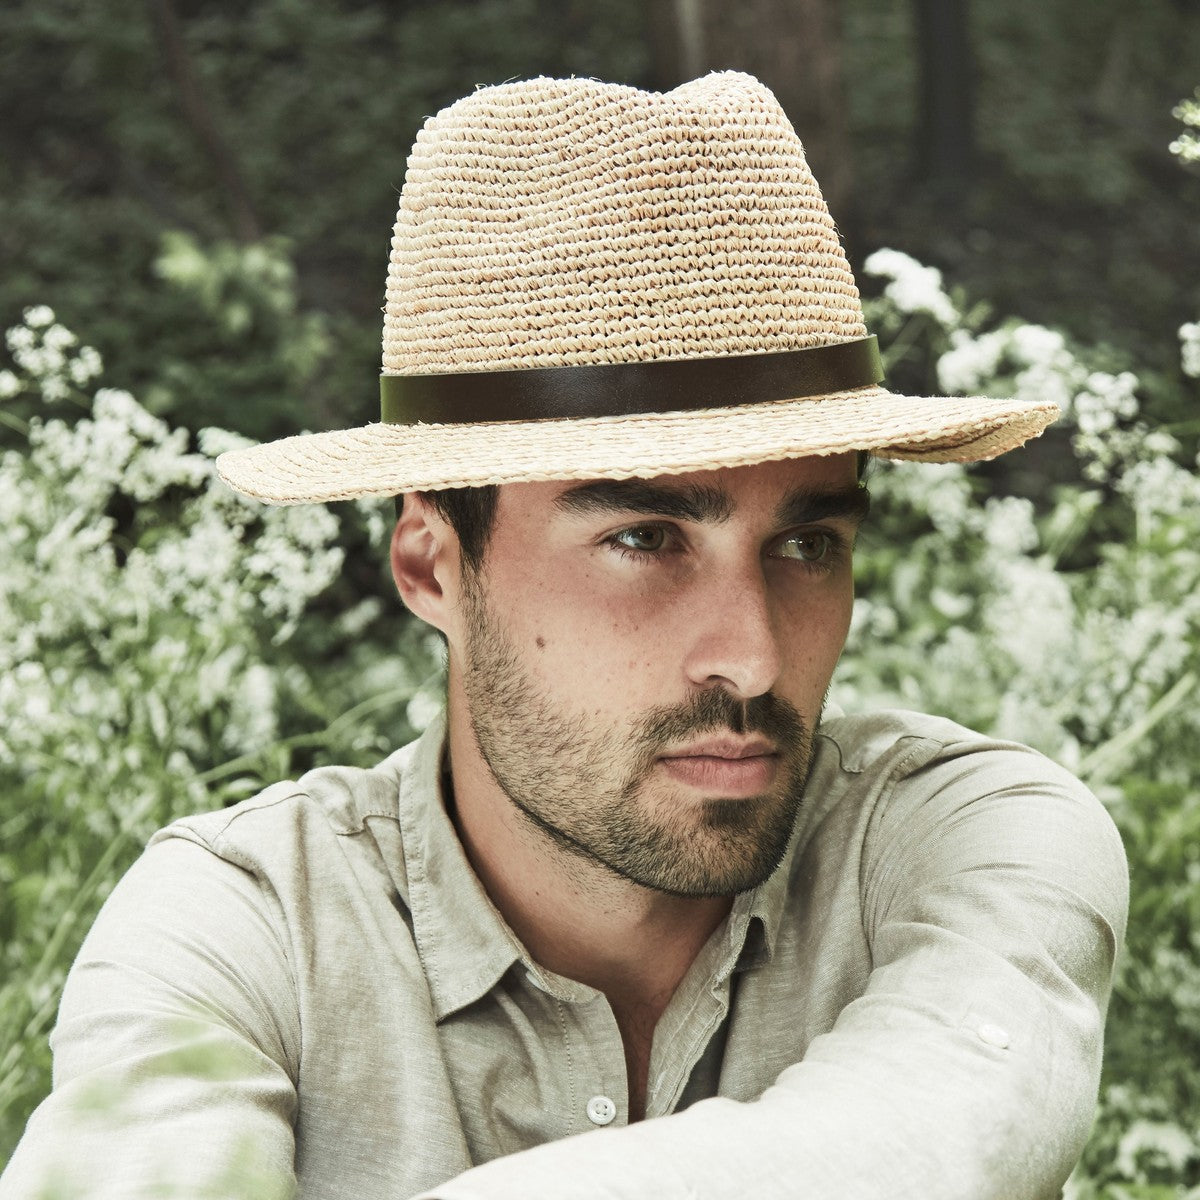 CARY FEDORA HAT IN STRAW